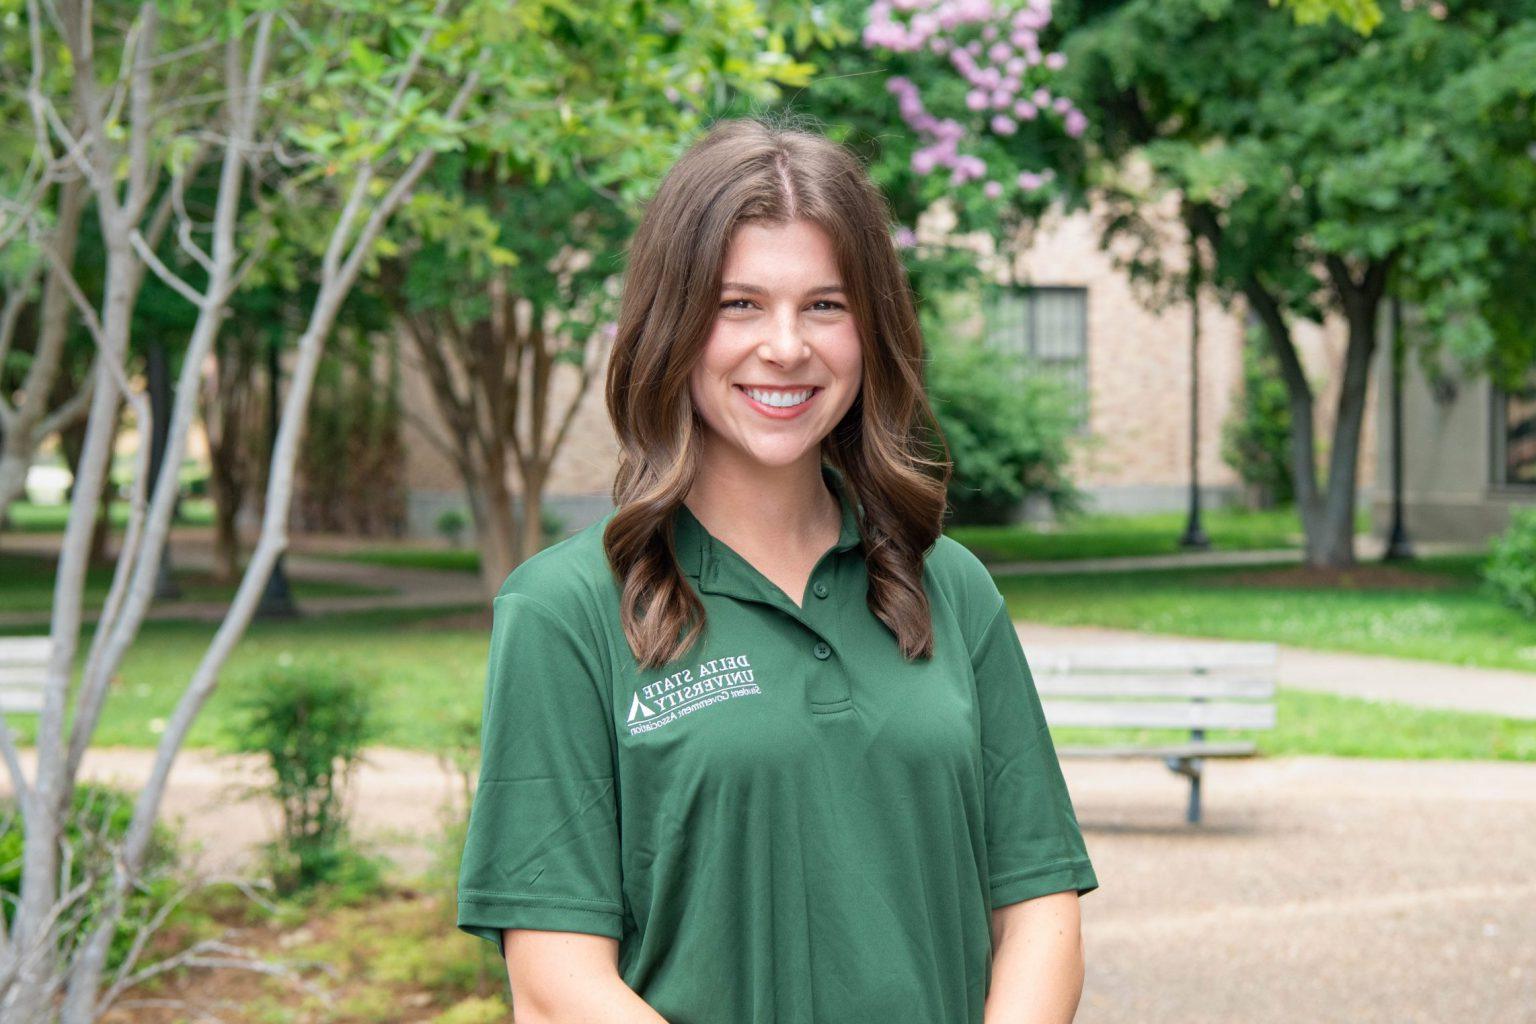 Haley Rooks, Delta State University student and 2023-2024 Student Government Association President